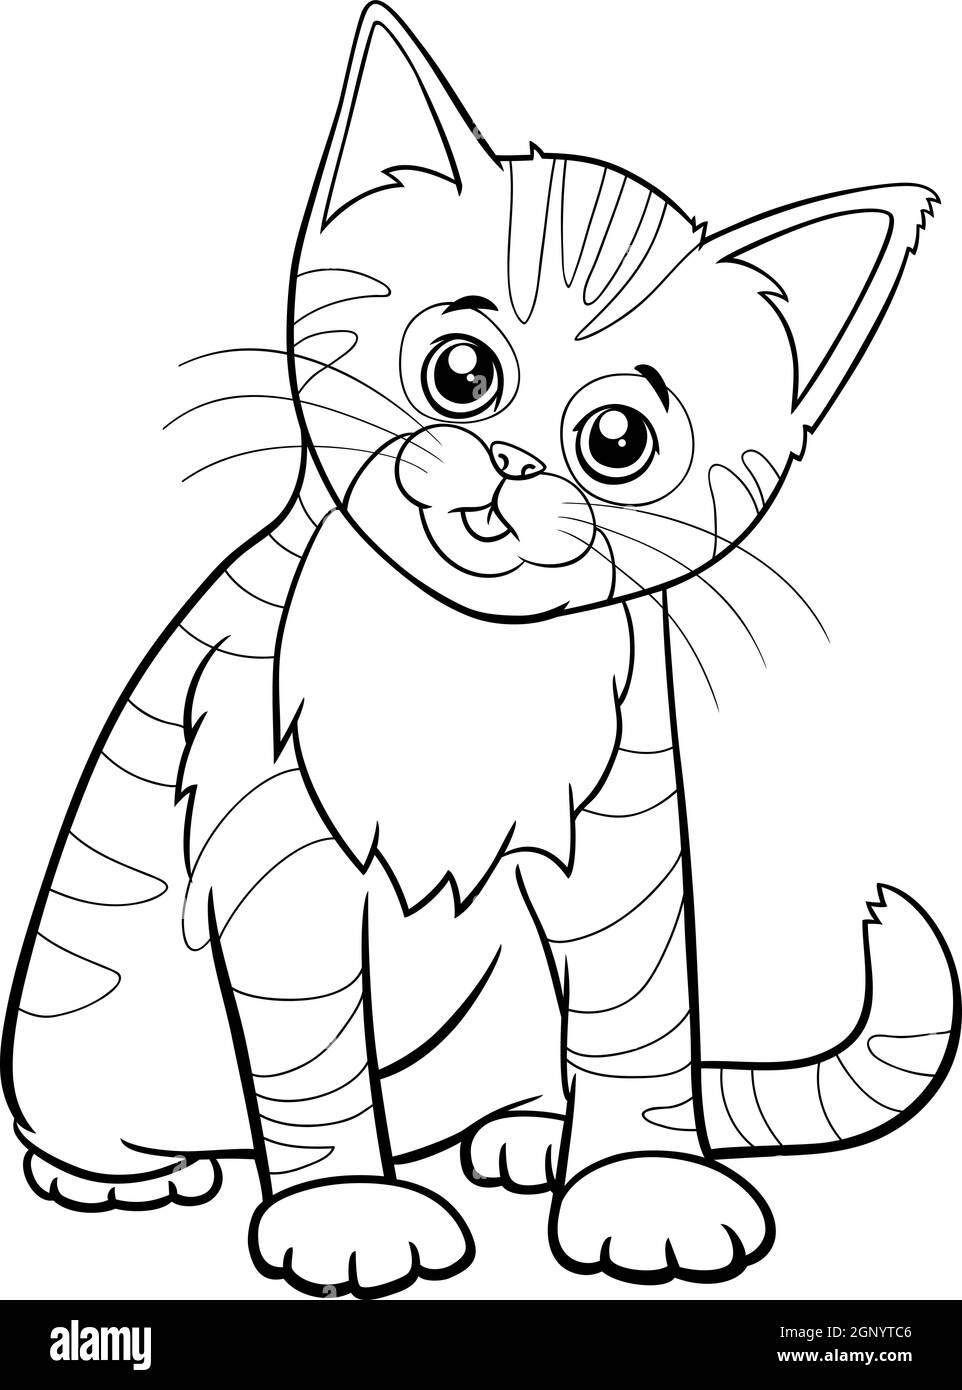 cute kitten cartoon animal character coloring book page Stock Vector